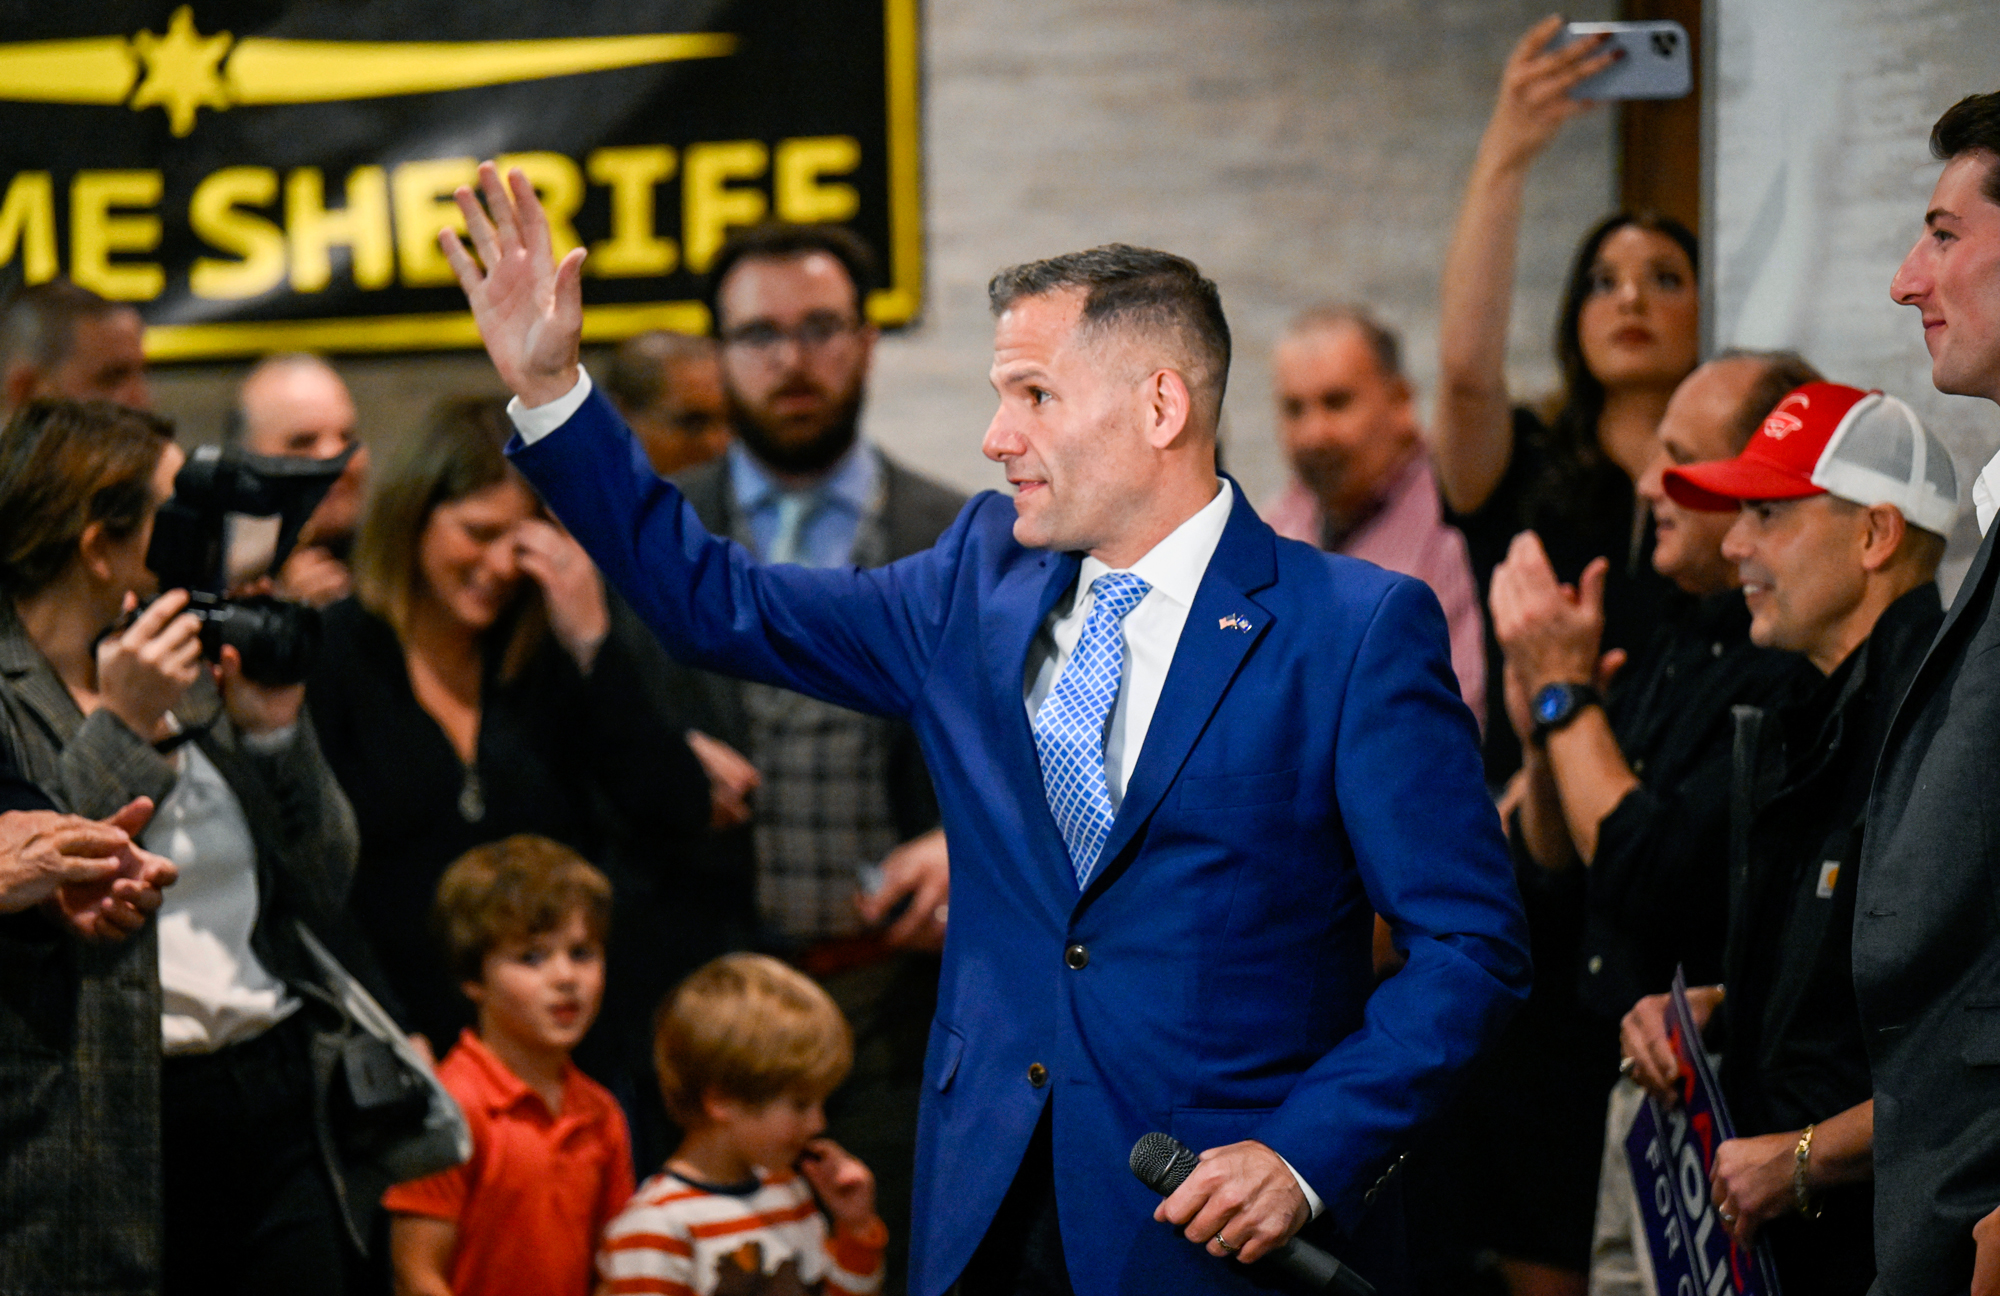 Republican Marc Molinaro waves to supporters on Tuesday at his election headquarters in Binghamton, New York.